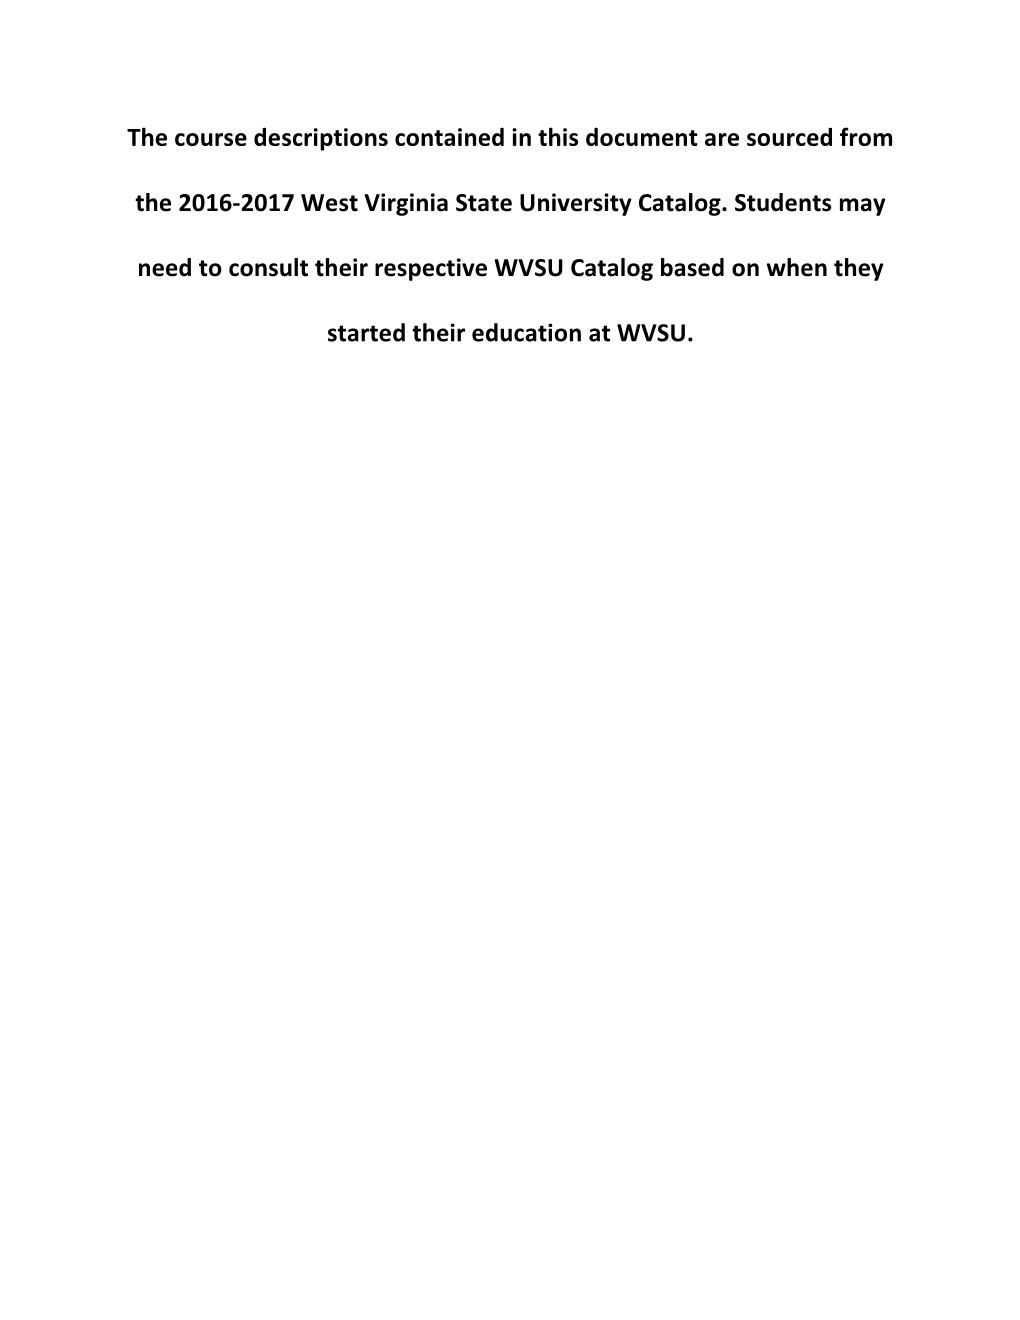 The Course Descriptions Contained in This Document Are Sourced from the 2016-2017 West Virginia State University Catalog